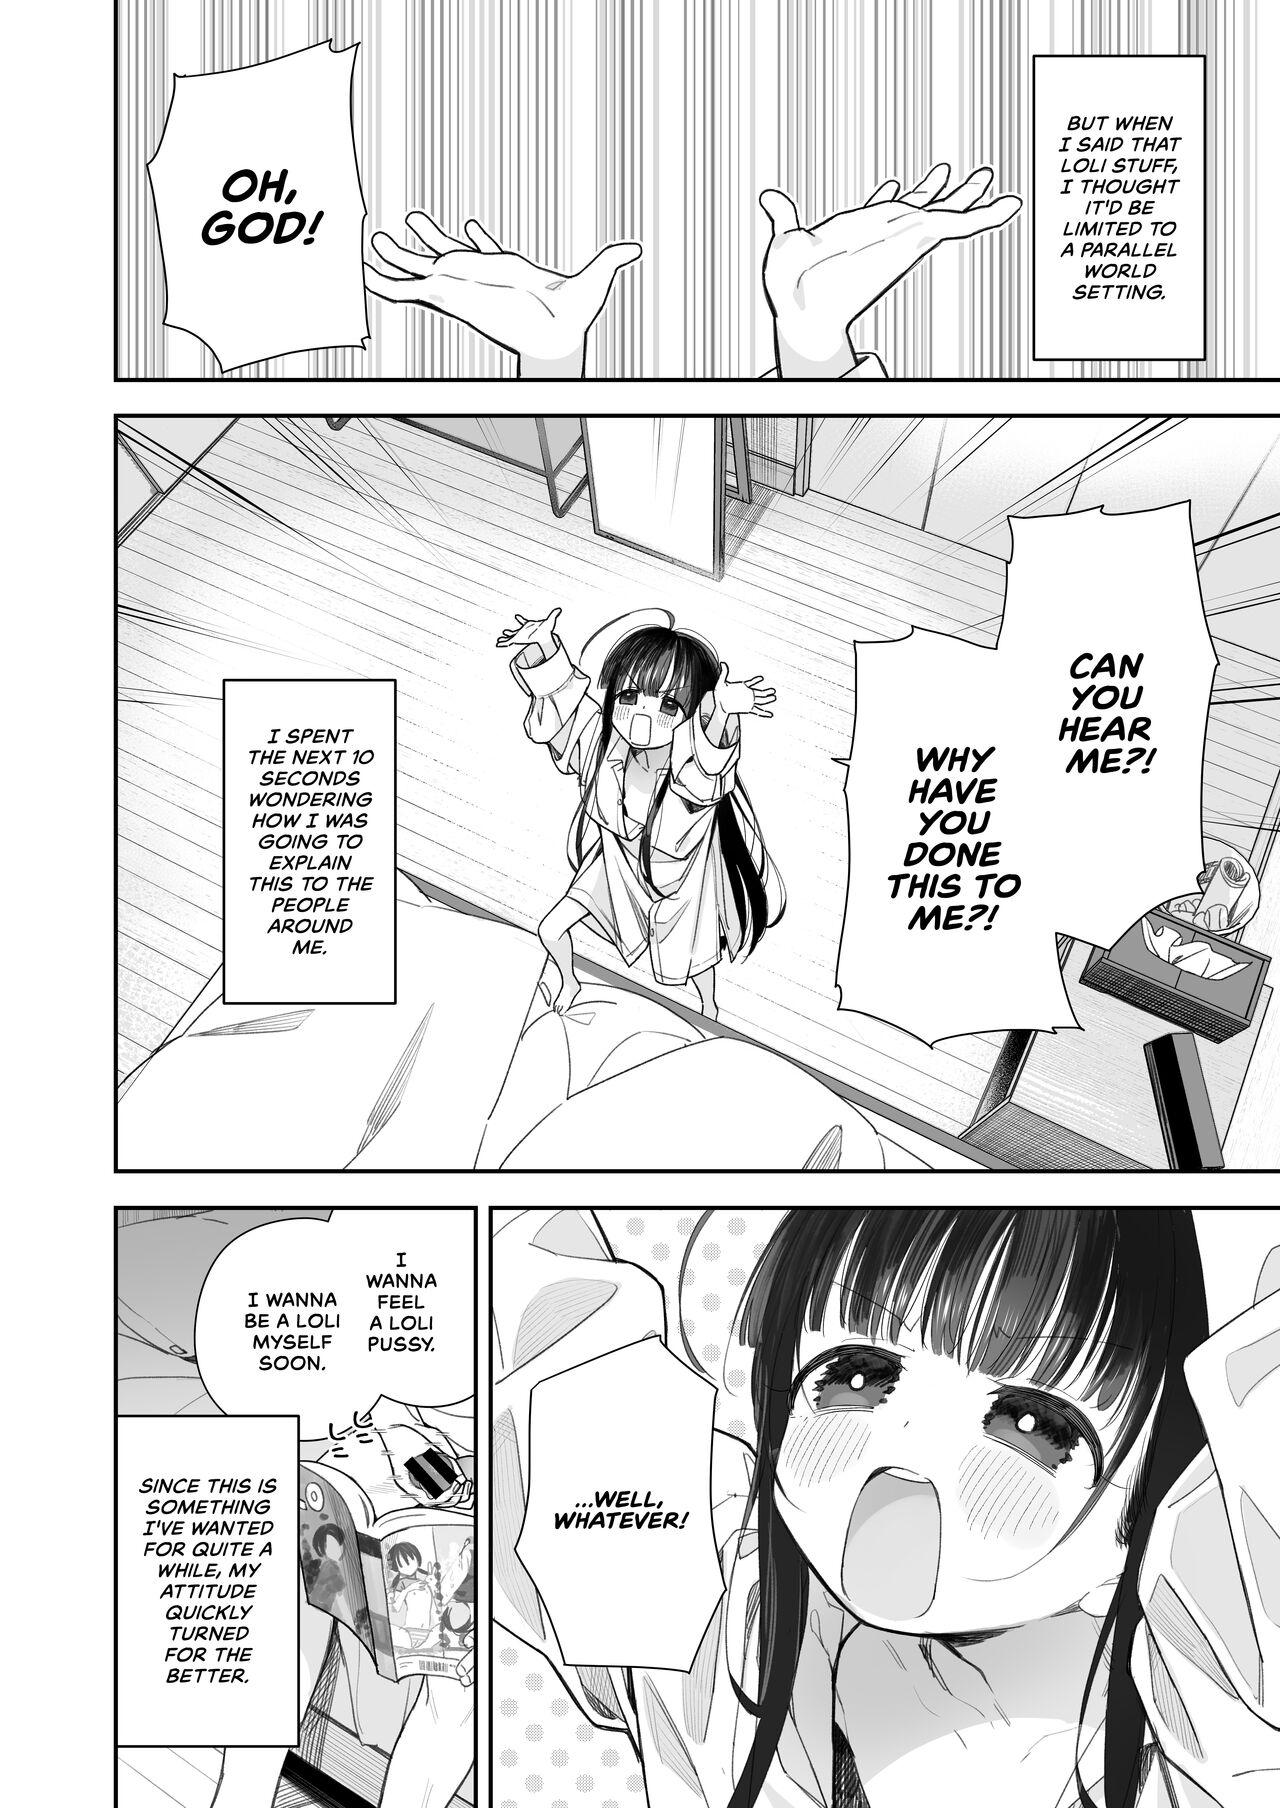 Free Porn Amateur [Asunaro Neat. (Ronna)] TS Loli Oji-san no Bouken Onanie Hen | The Adventures of an Old Man Who Was Gender-Swapped Into a Loli ~Masturbation Chapter~ [English] [CulturedCommissions] [Digital] - Original Travesti - Page 5